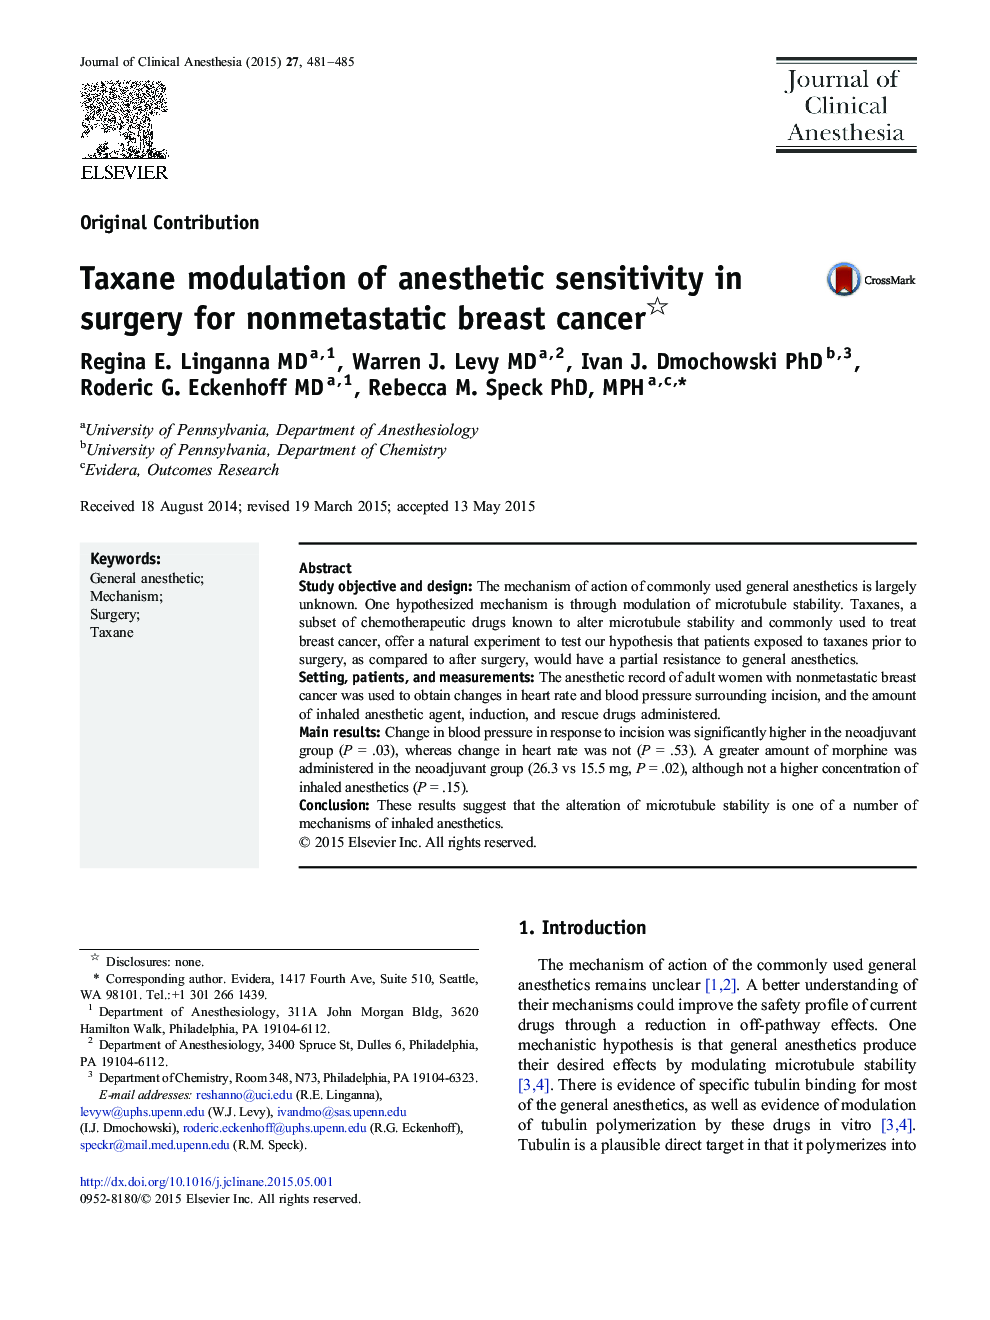 Taxane modulation of anesthetic sensitivity in surgery for nonmetastatic breast cancer 